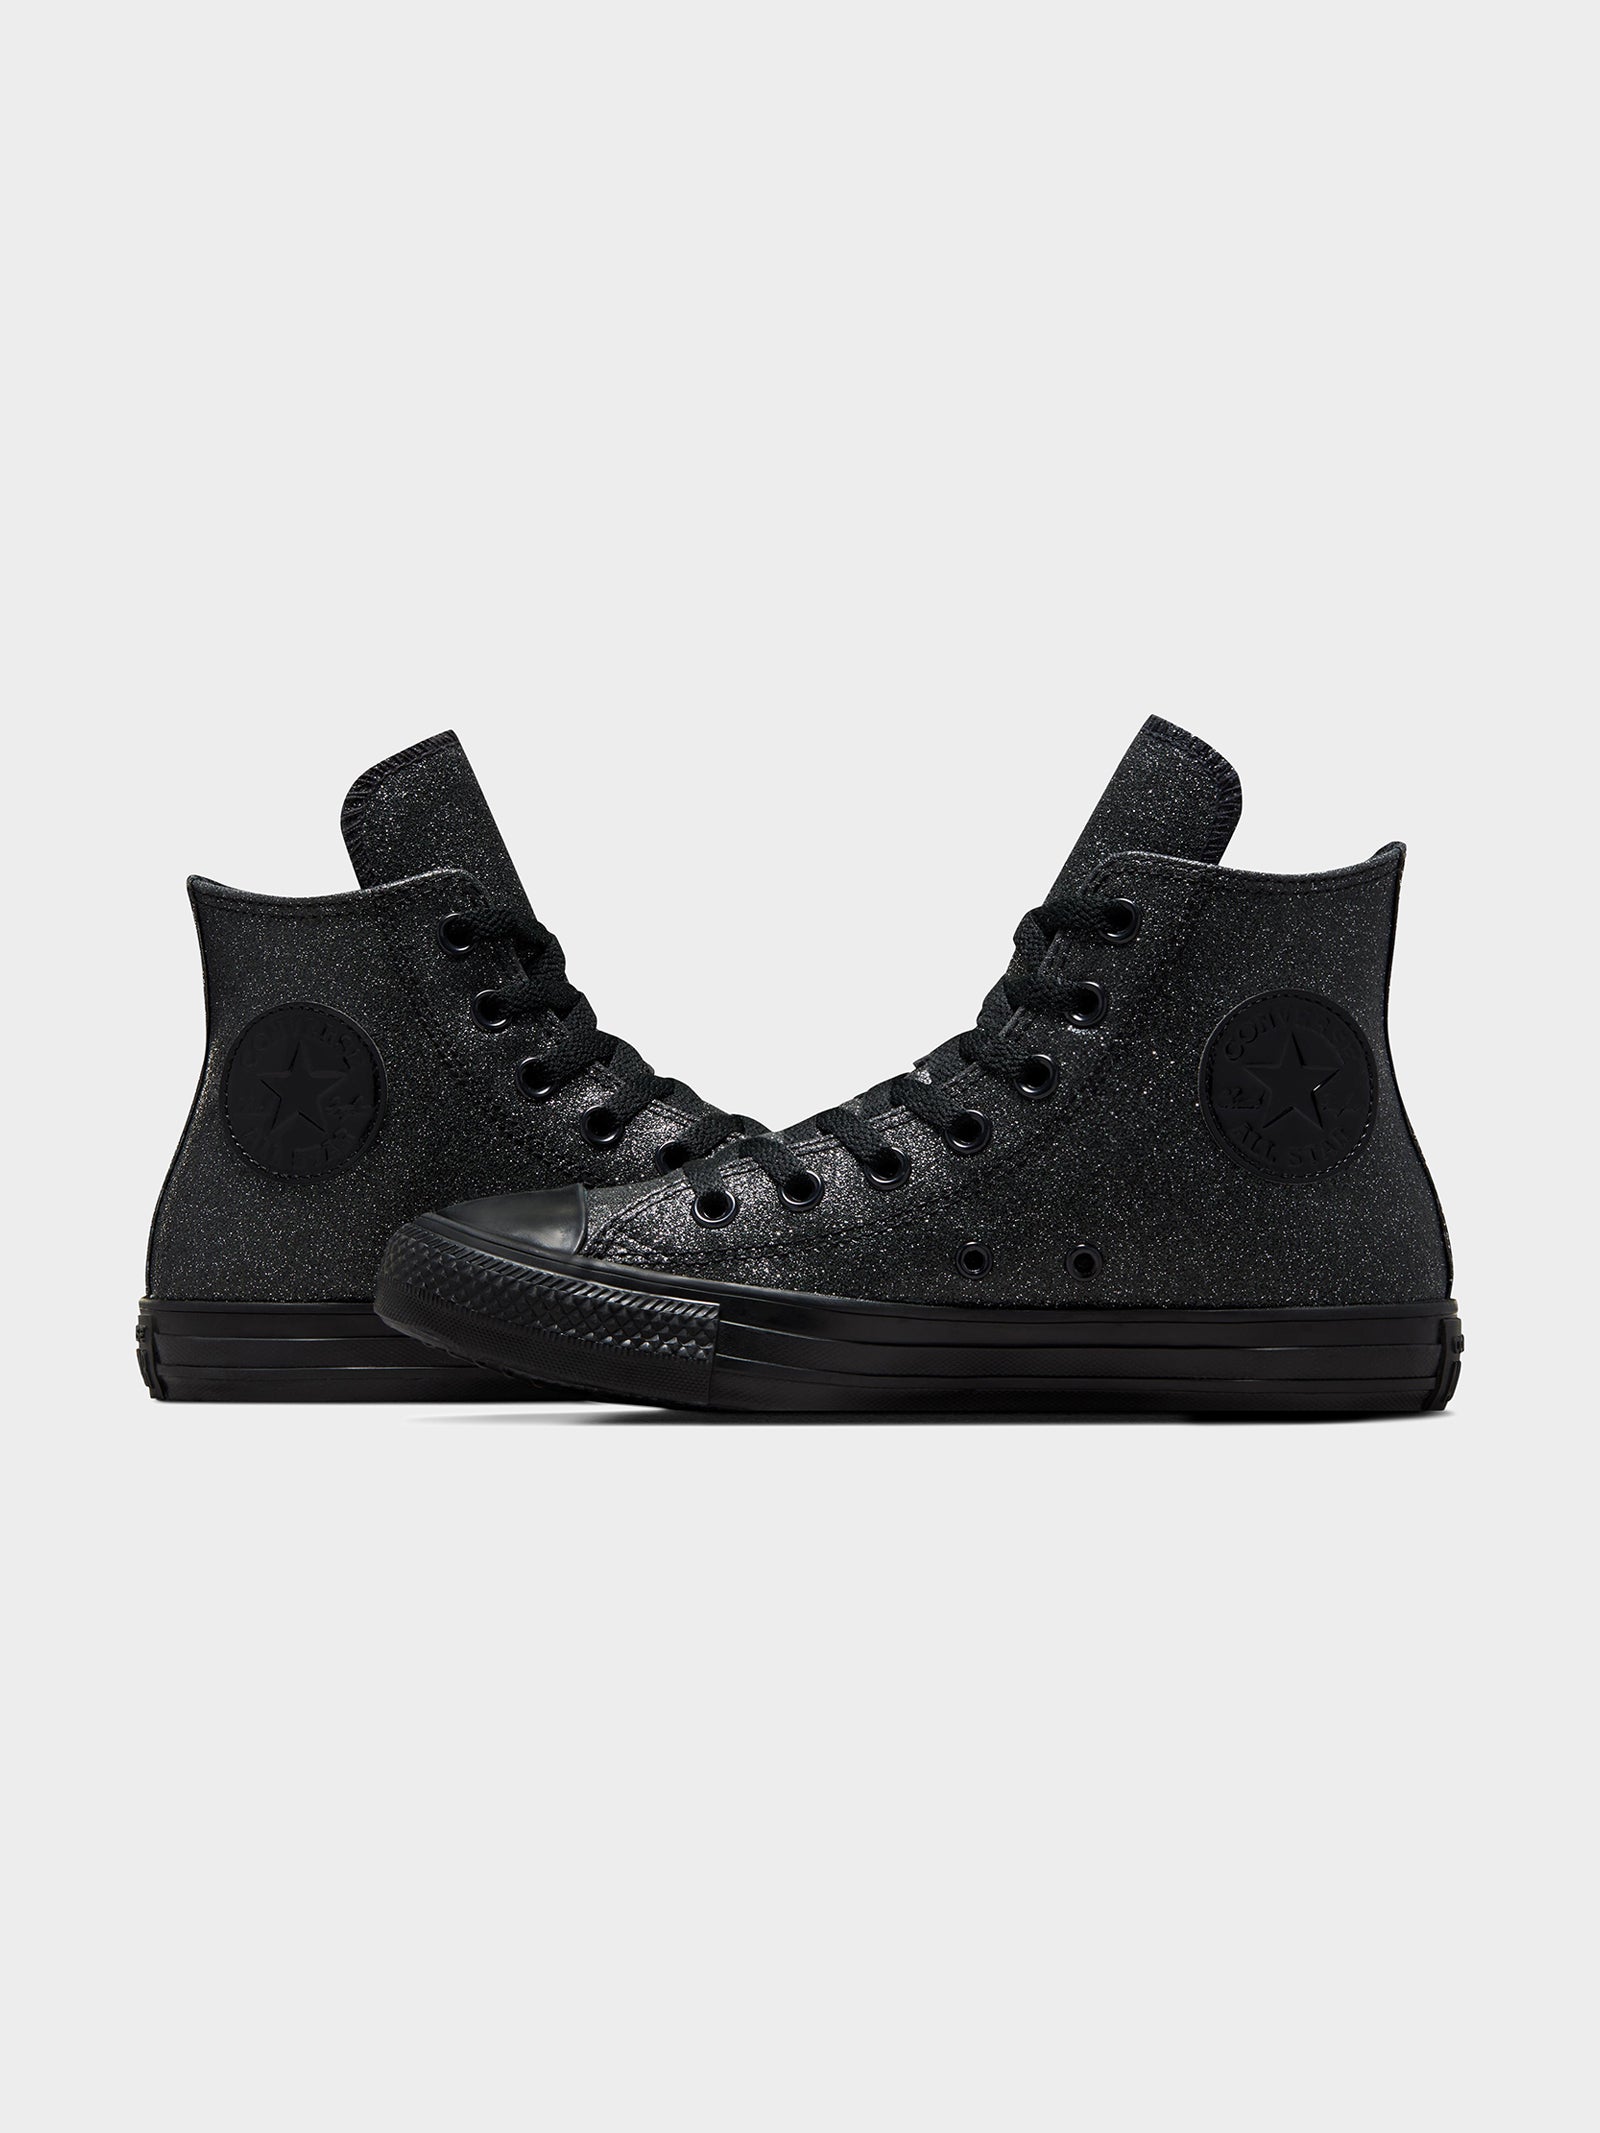 Unisex Chuck Taylor All Star Sparkle Party High Top Sneakers in Black